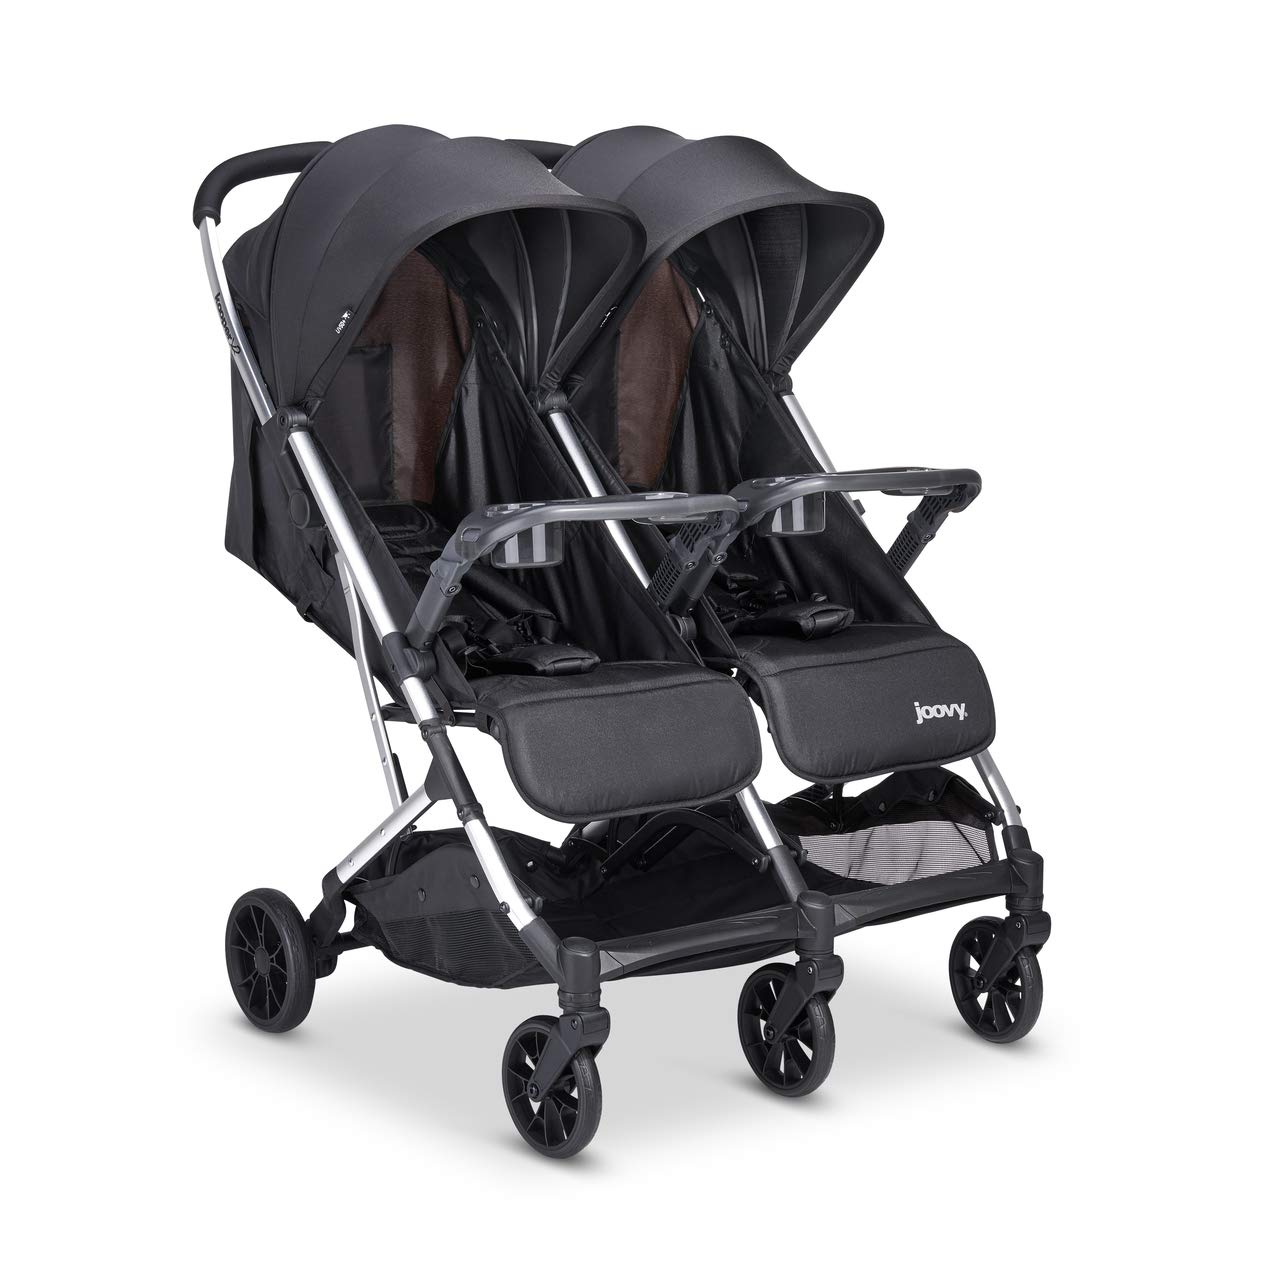 double travel system side by side